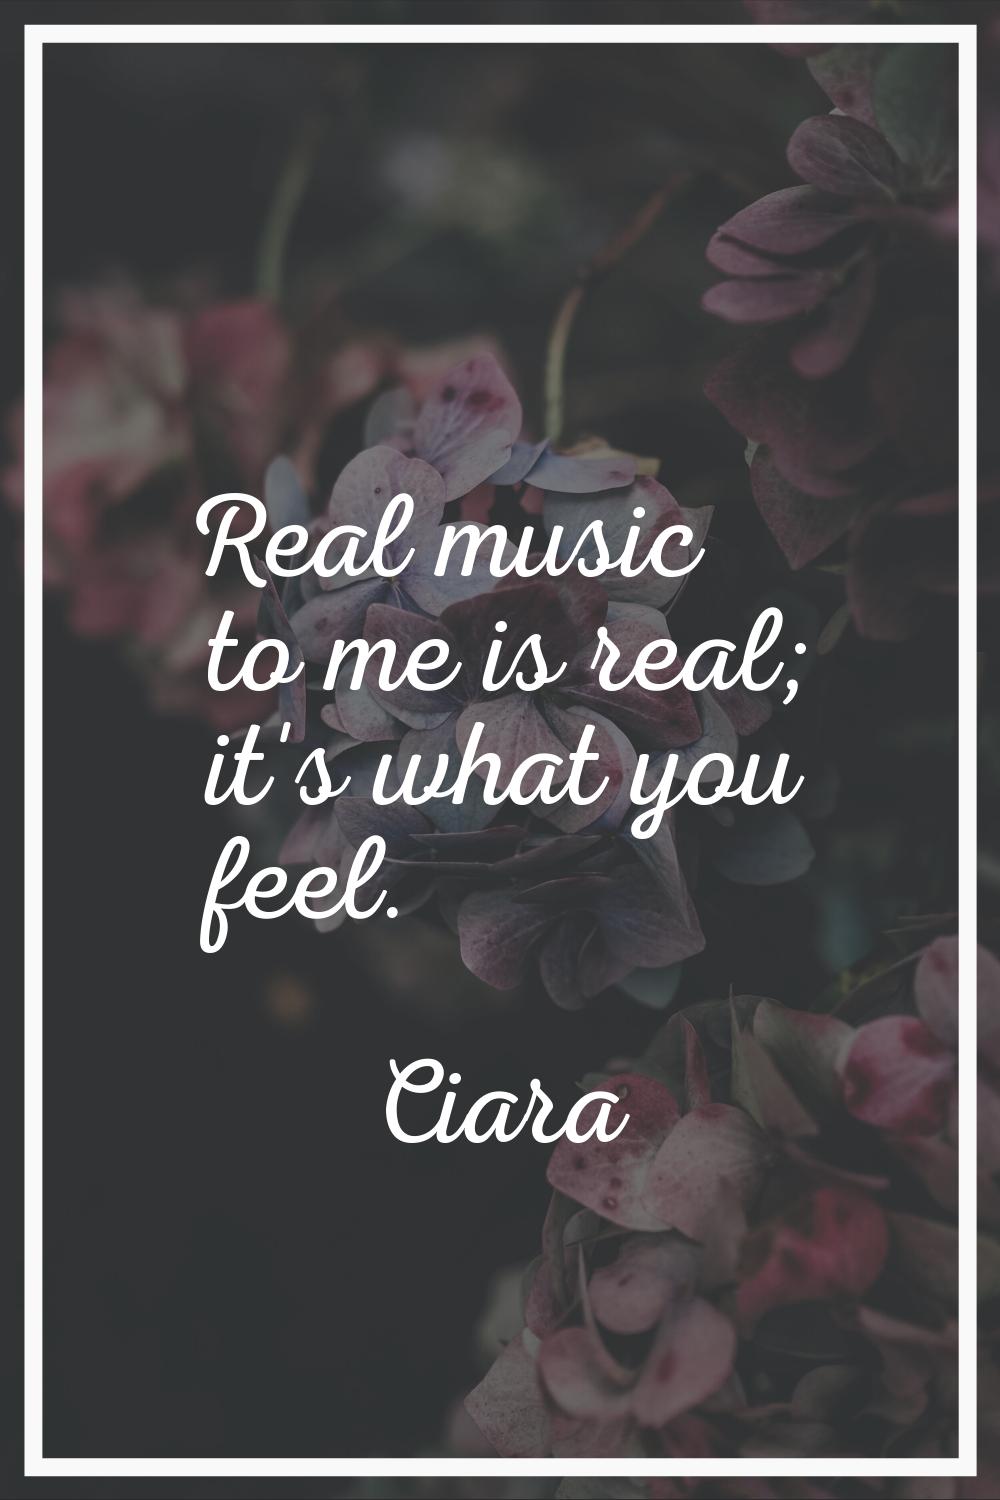 Real music to me is real; it's what you feel.